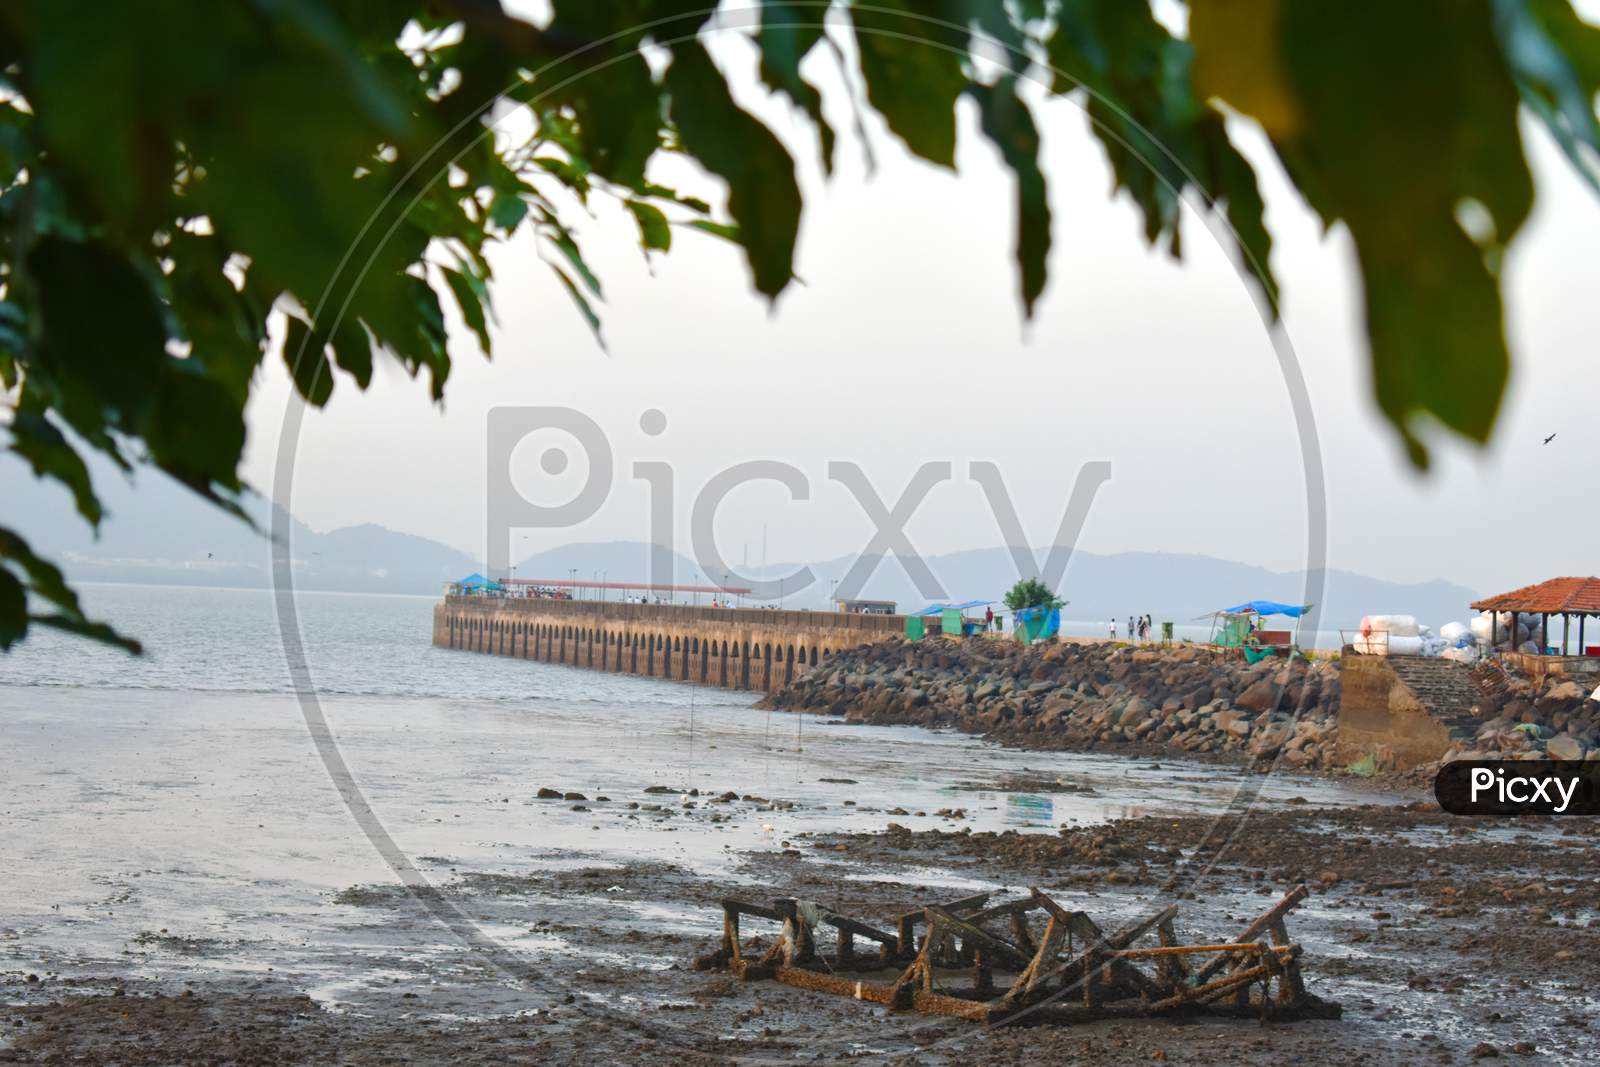 Image Of A Mumbai Port Captured With A Tree In The Foreground.